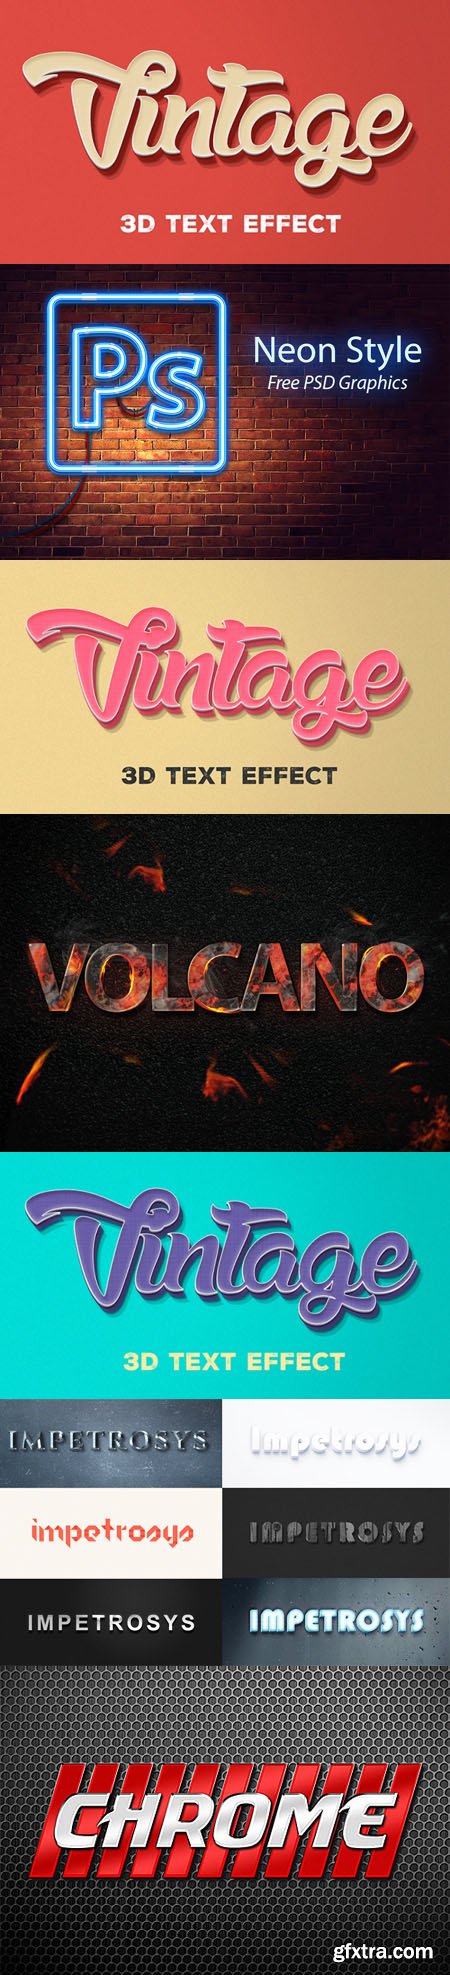 Photoshop Text Effects - Neon, 3D Vintage, Burning, Chrome and others